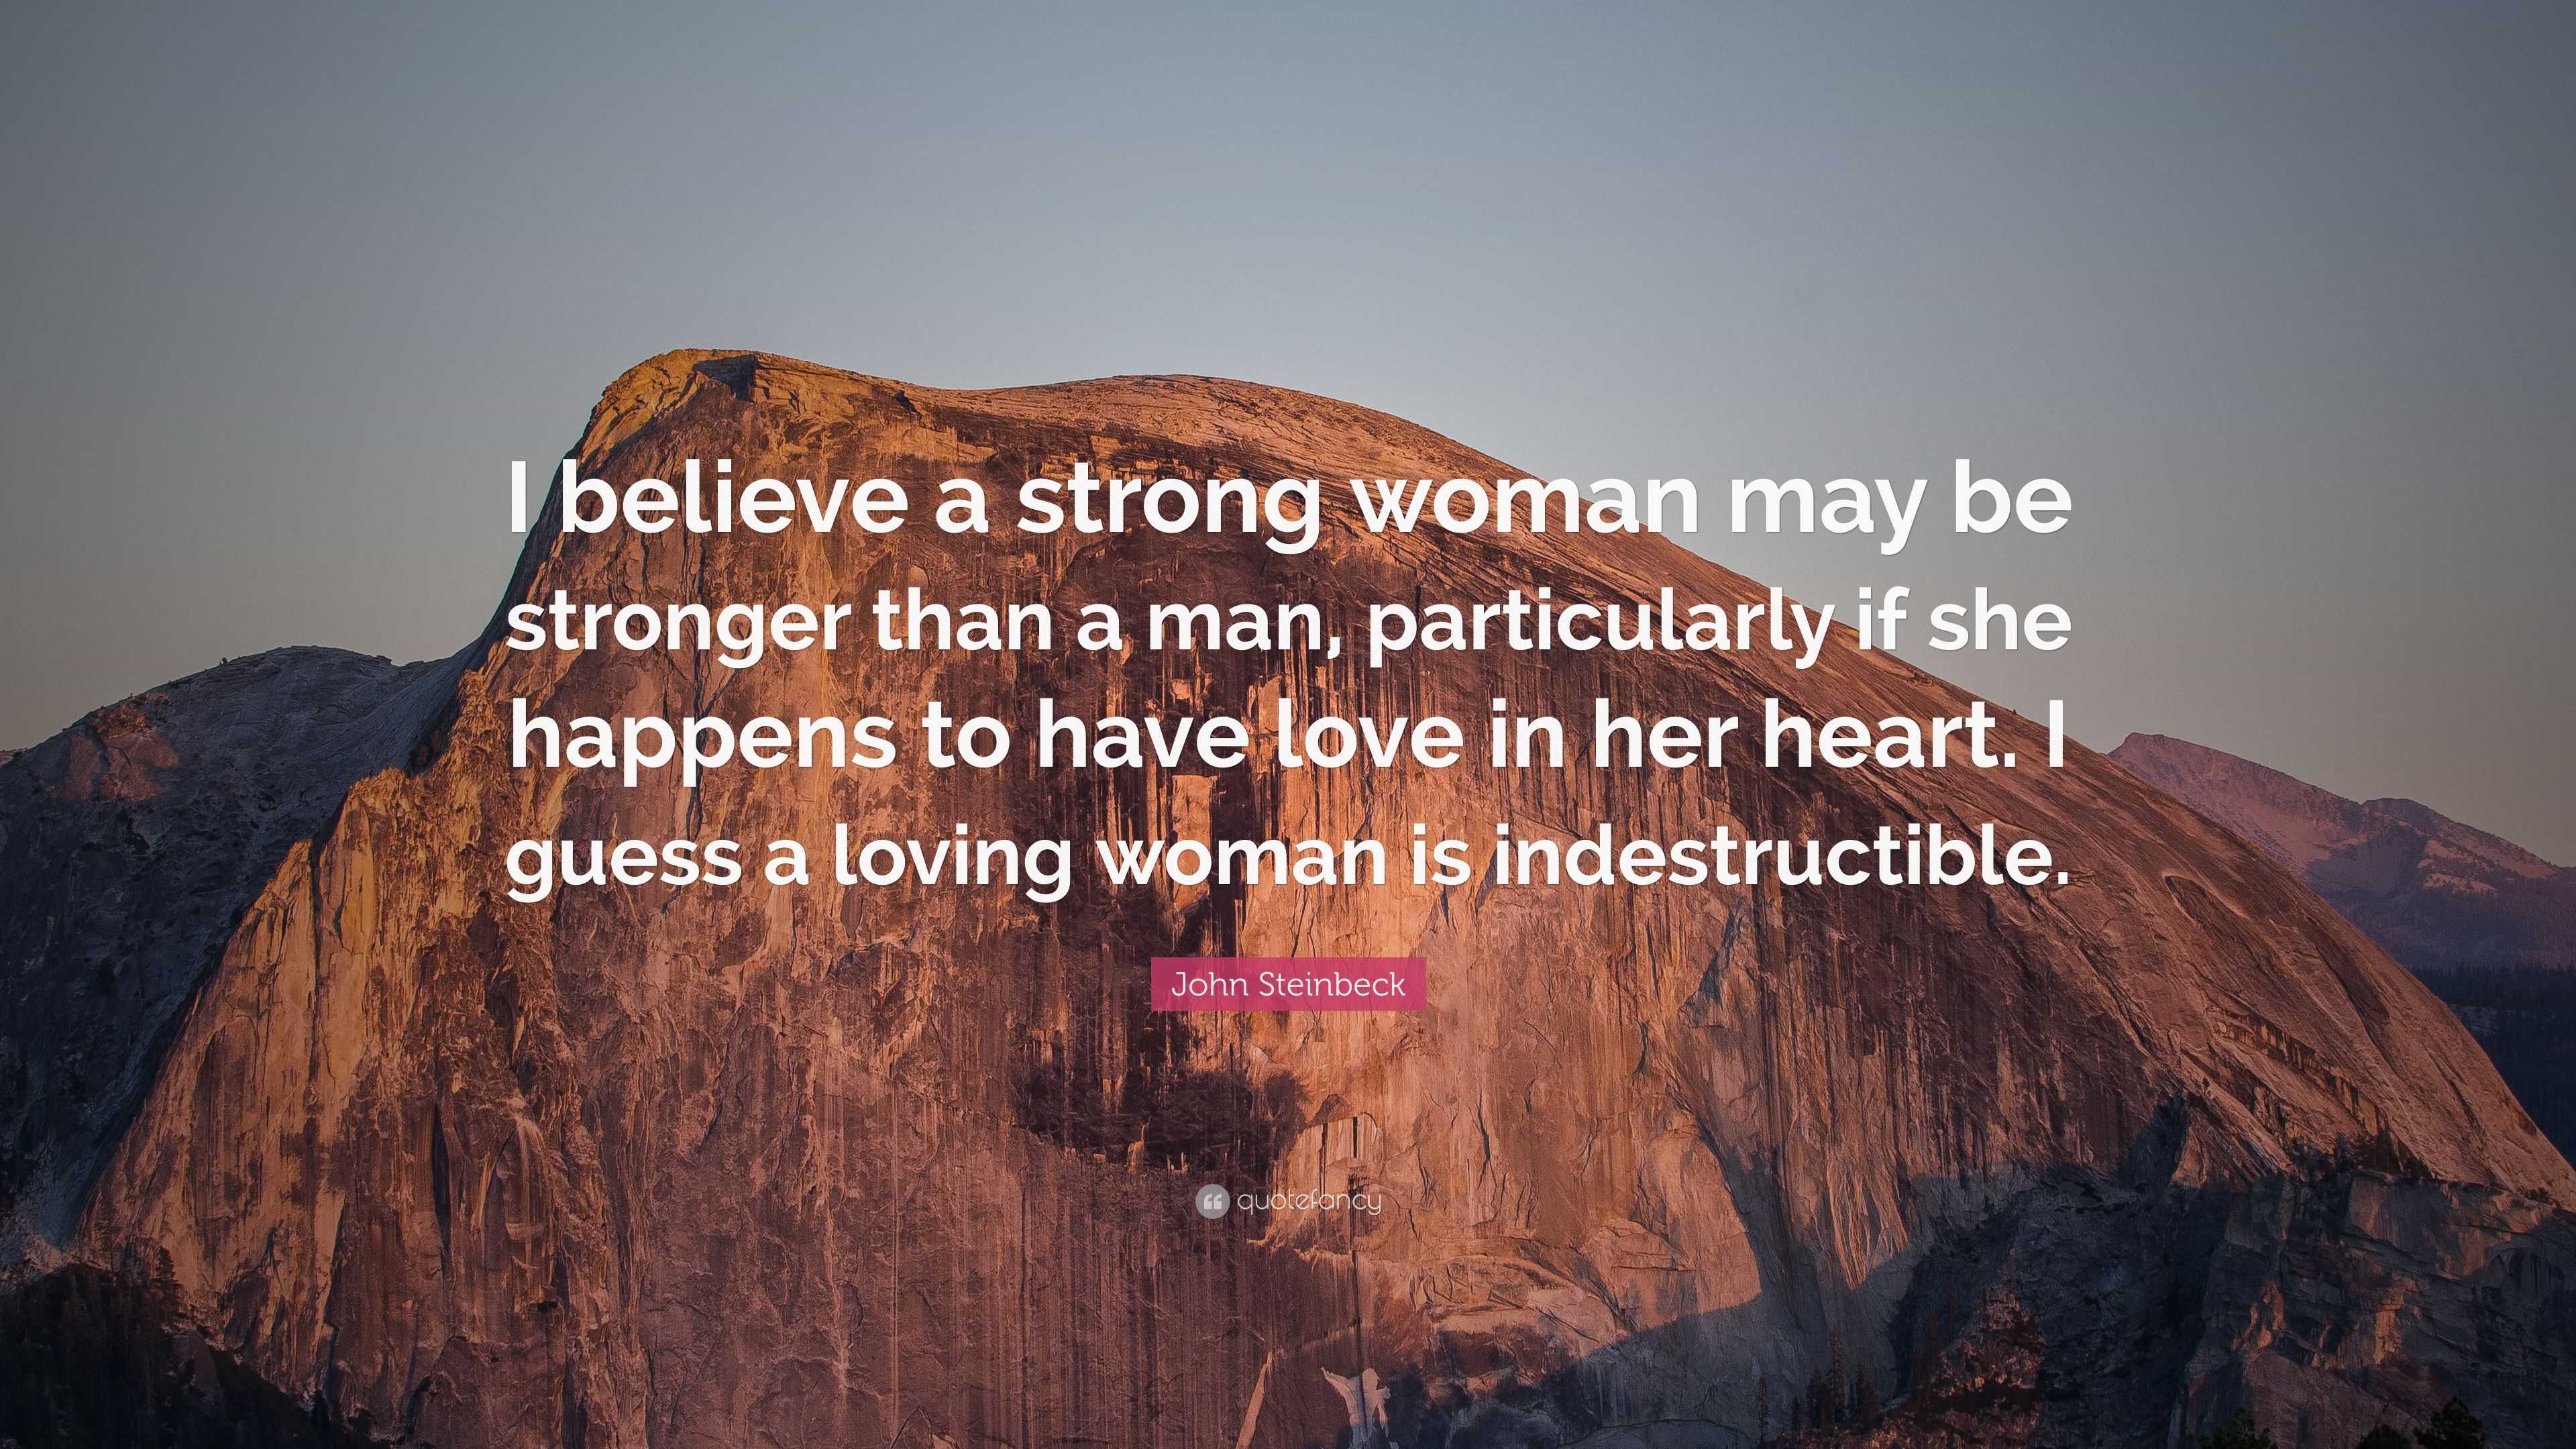 John Steinbeck Quote: “I believe a strong woman may be stronger than a ...